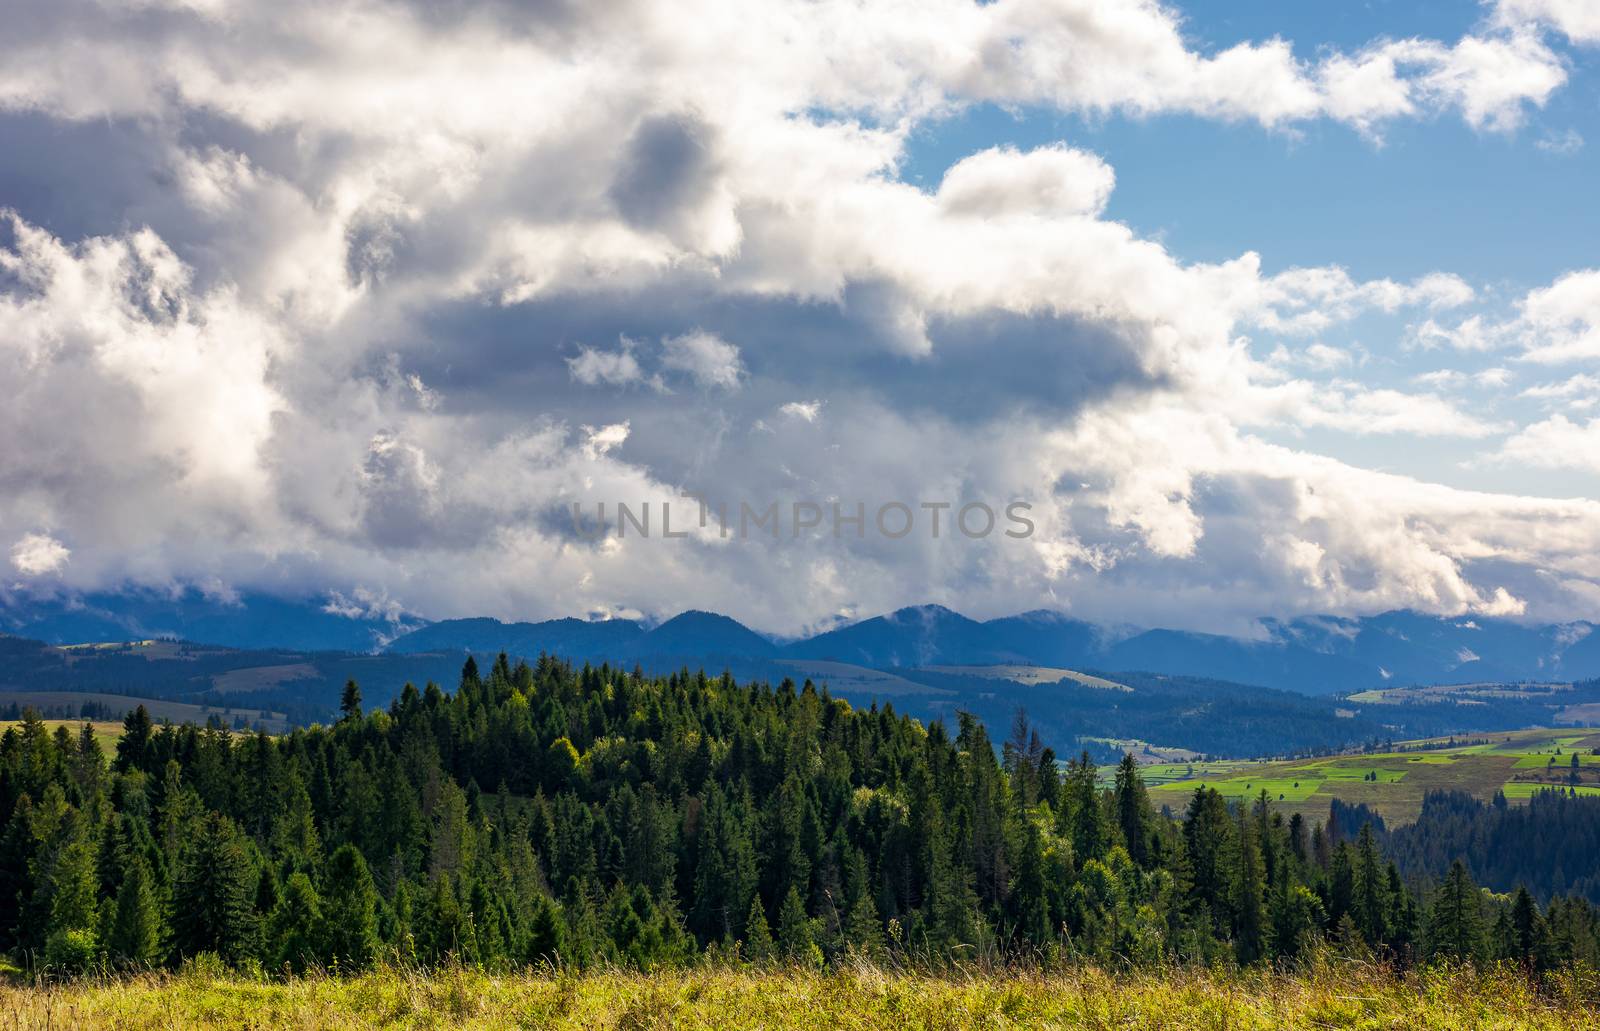 trees near valley in mountains under sky with clouds by Pellinni